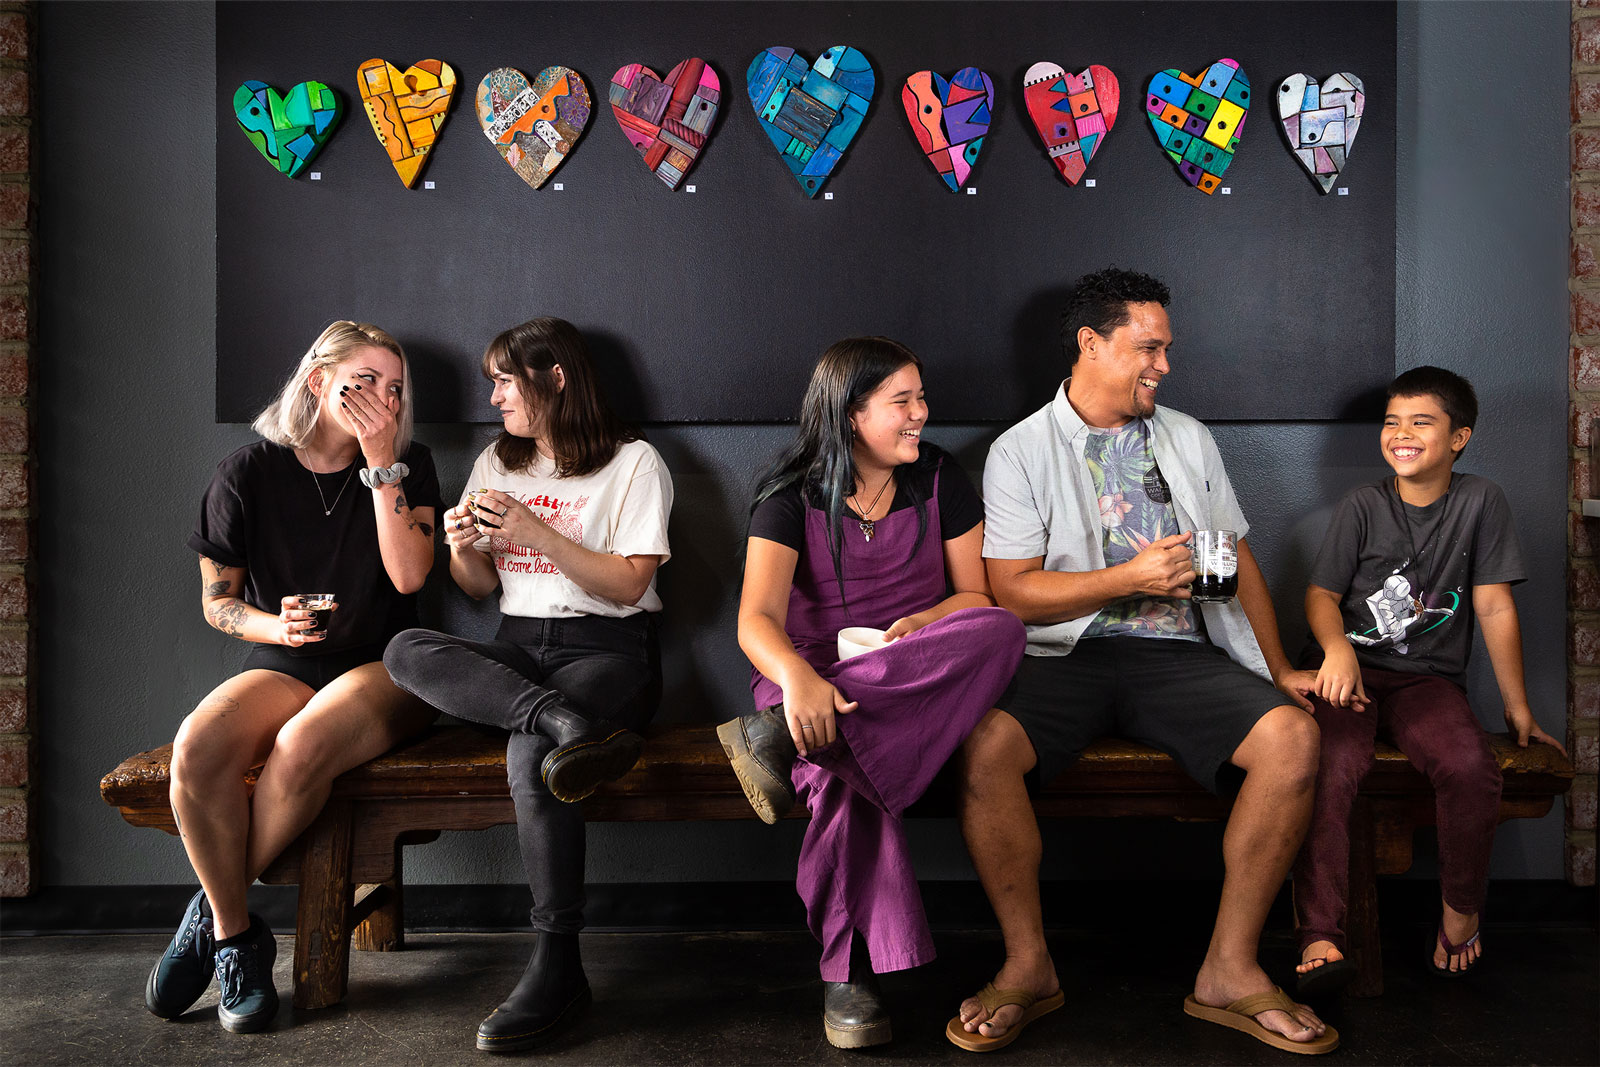 A group of people gather on a bench with hearts painted on the wall.